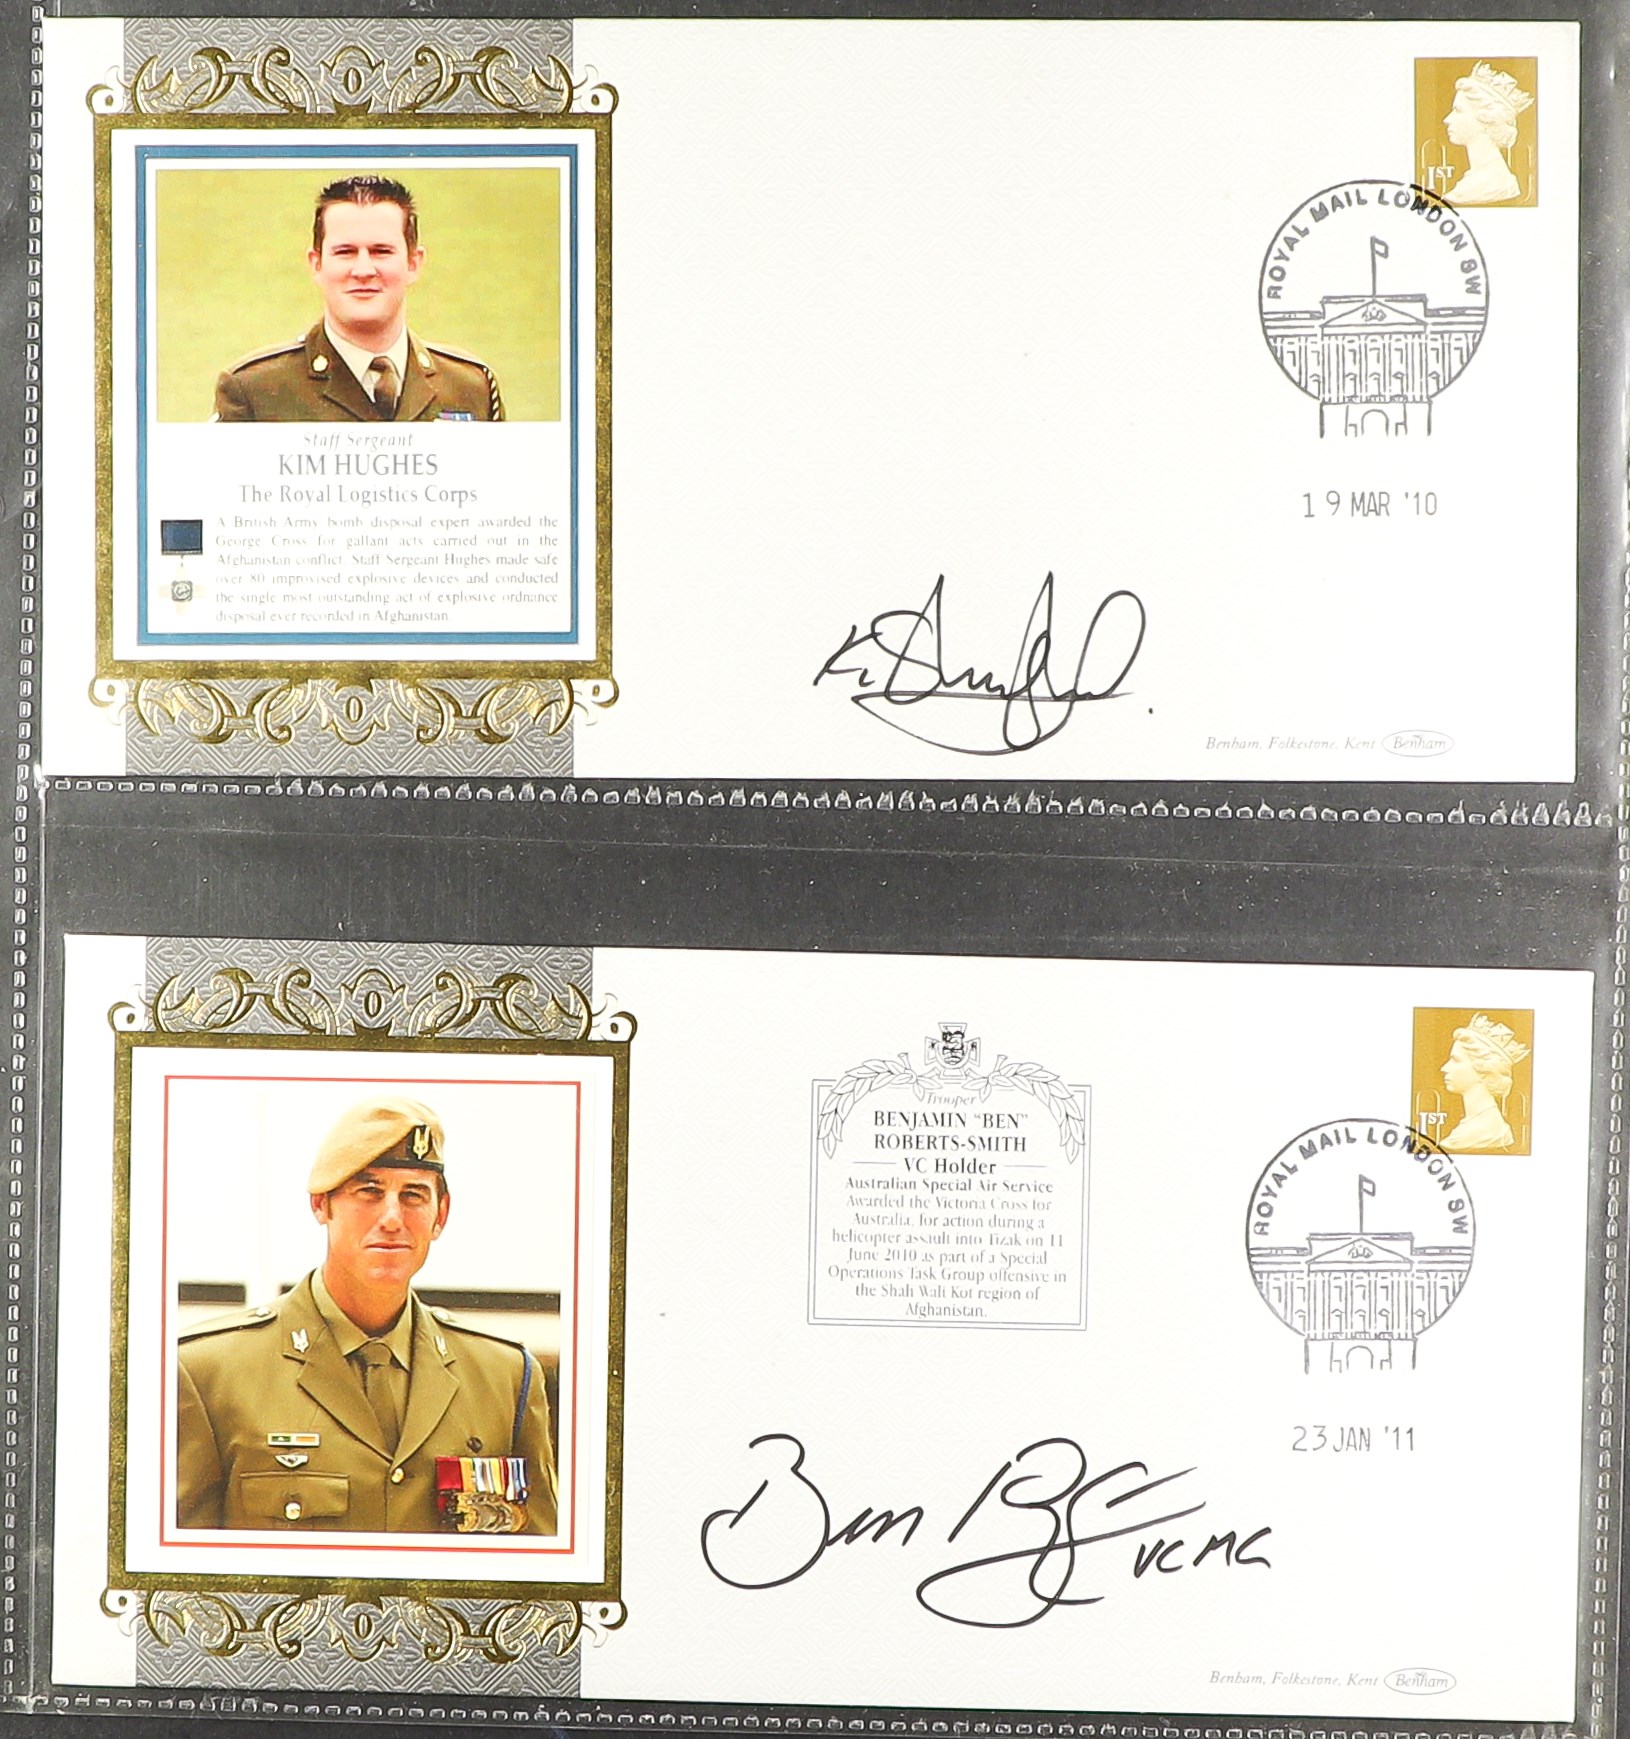 GB. COVERS & POSTAL HISTORY VICTORIA CROSS & GEORGE CROSS RECIPIENTS SIGNED COVERS Mostly 2003 - Image 7 of 11